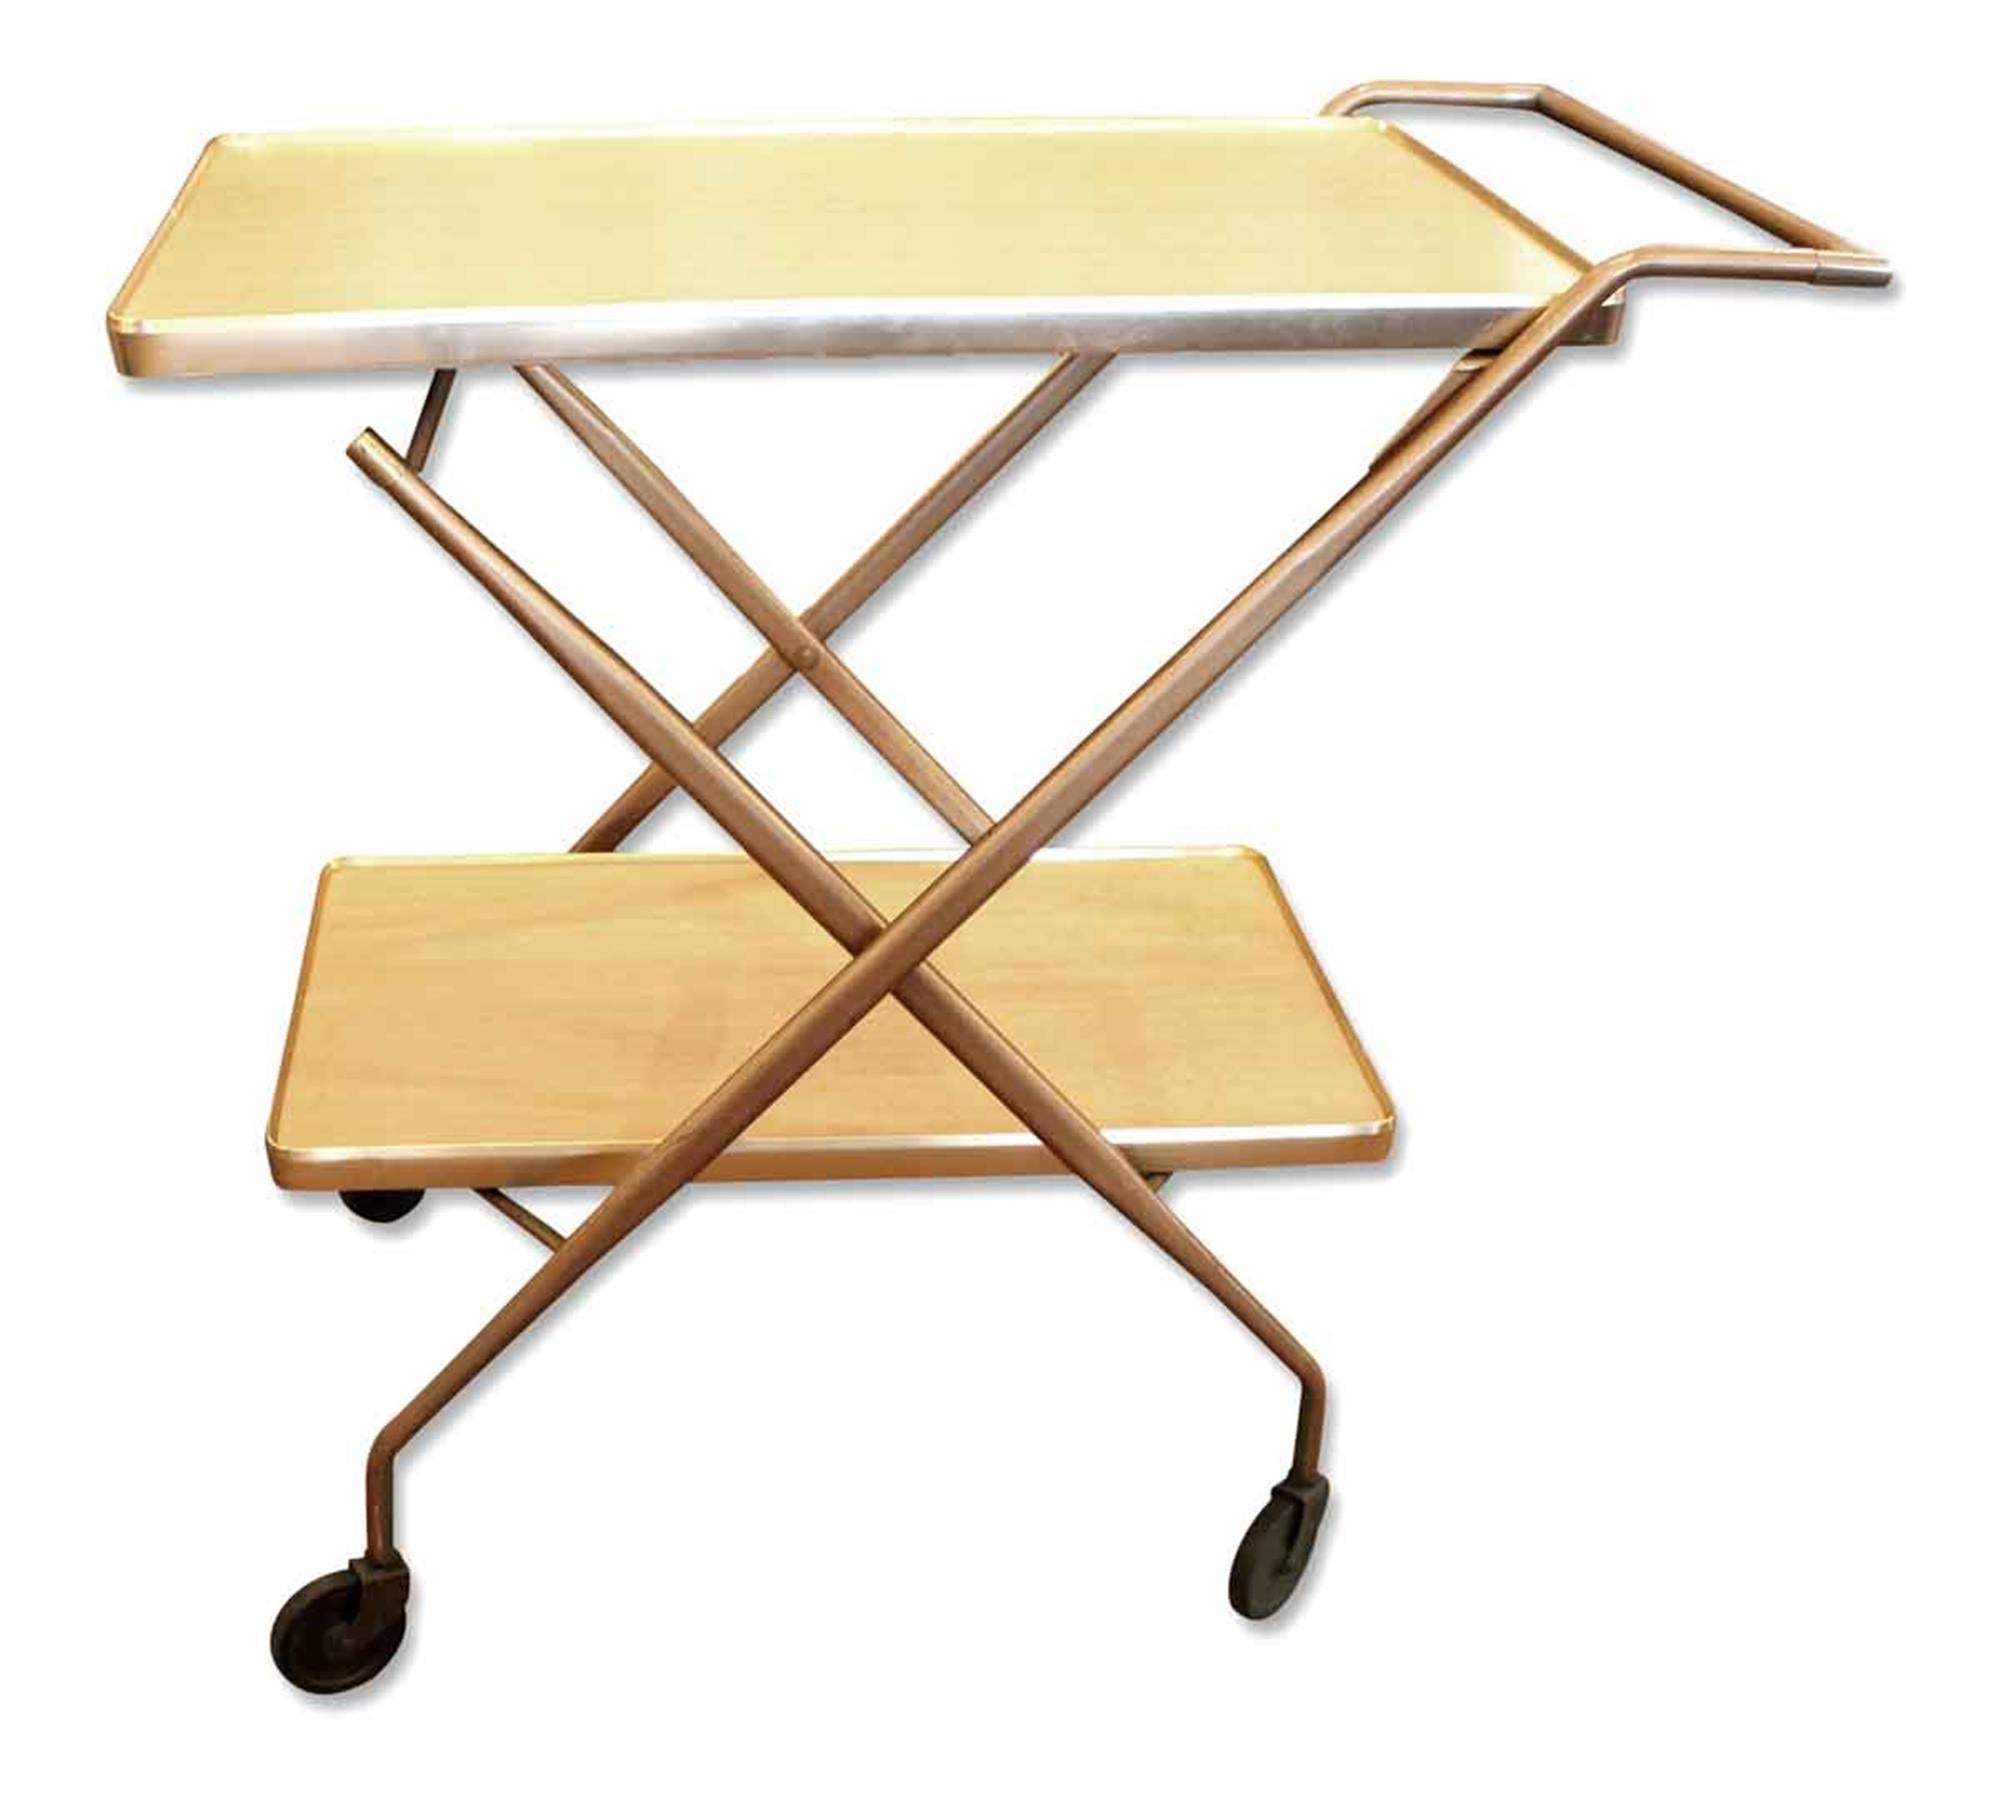 Simple 1950s Mid-Century Modern folding serving cart with a brass frame and formica shelves. This can be seen at our 2420 Broadway location on the upper west side in Manhattan.